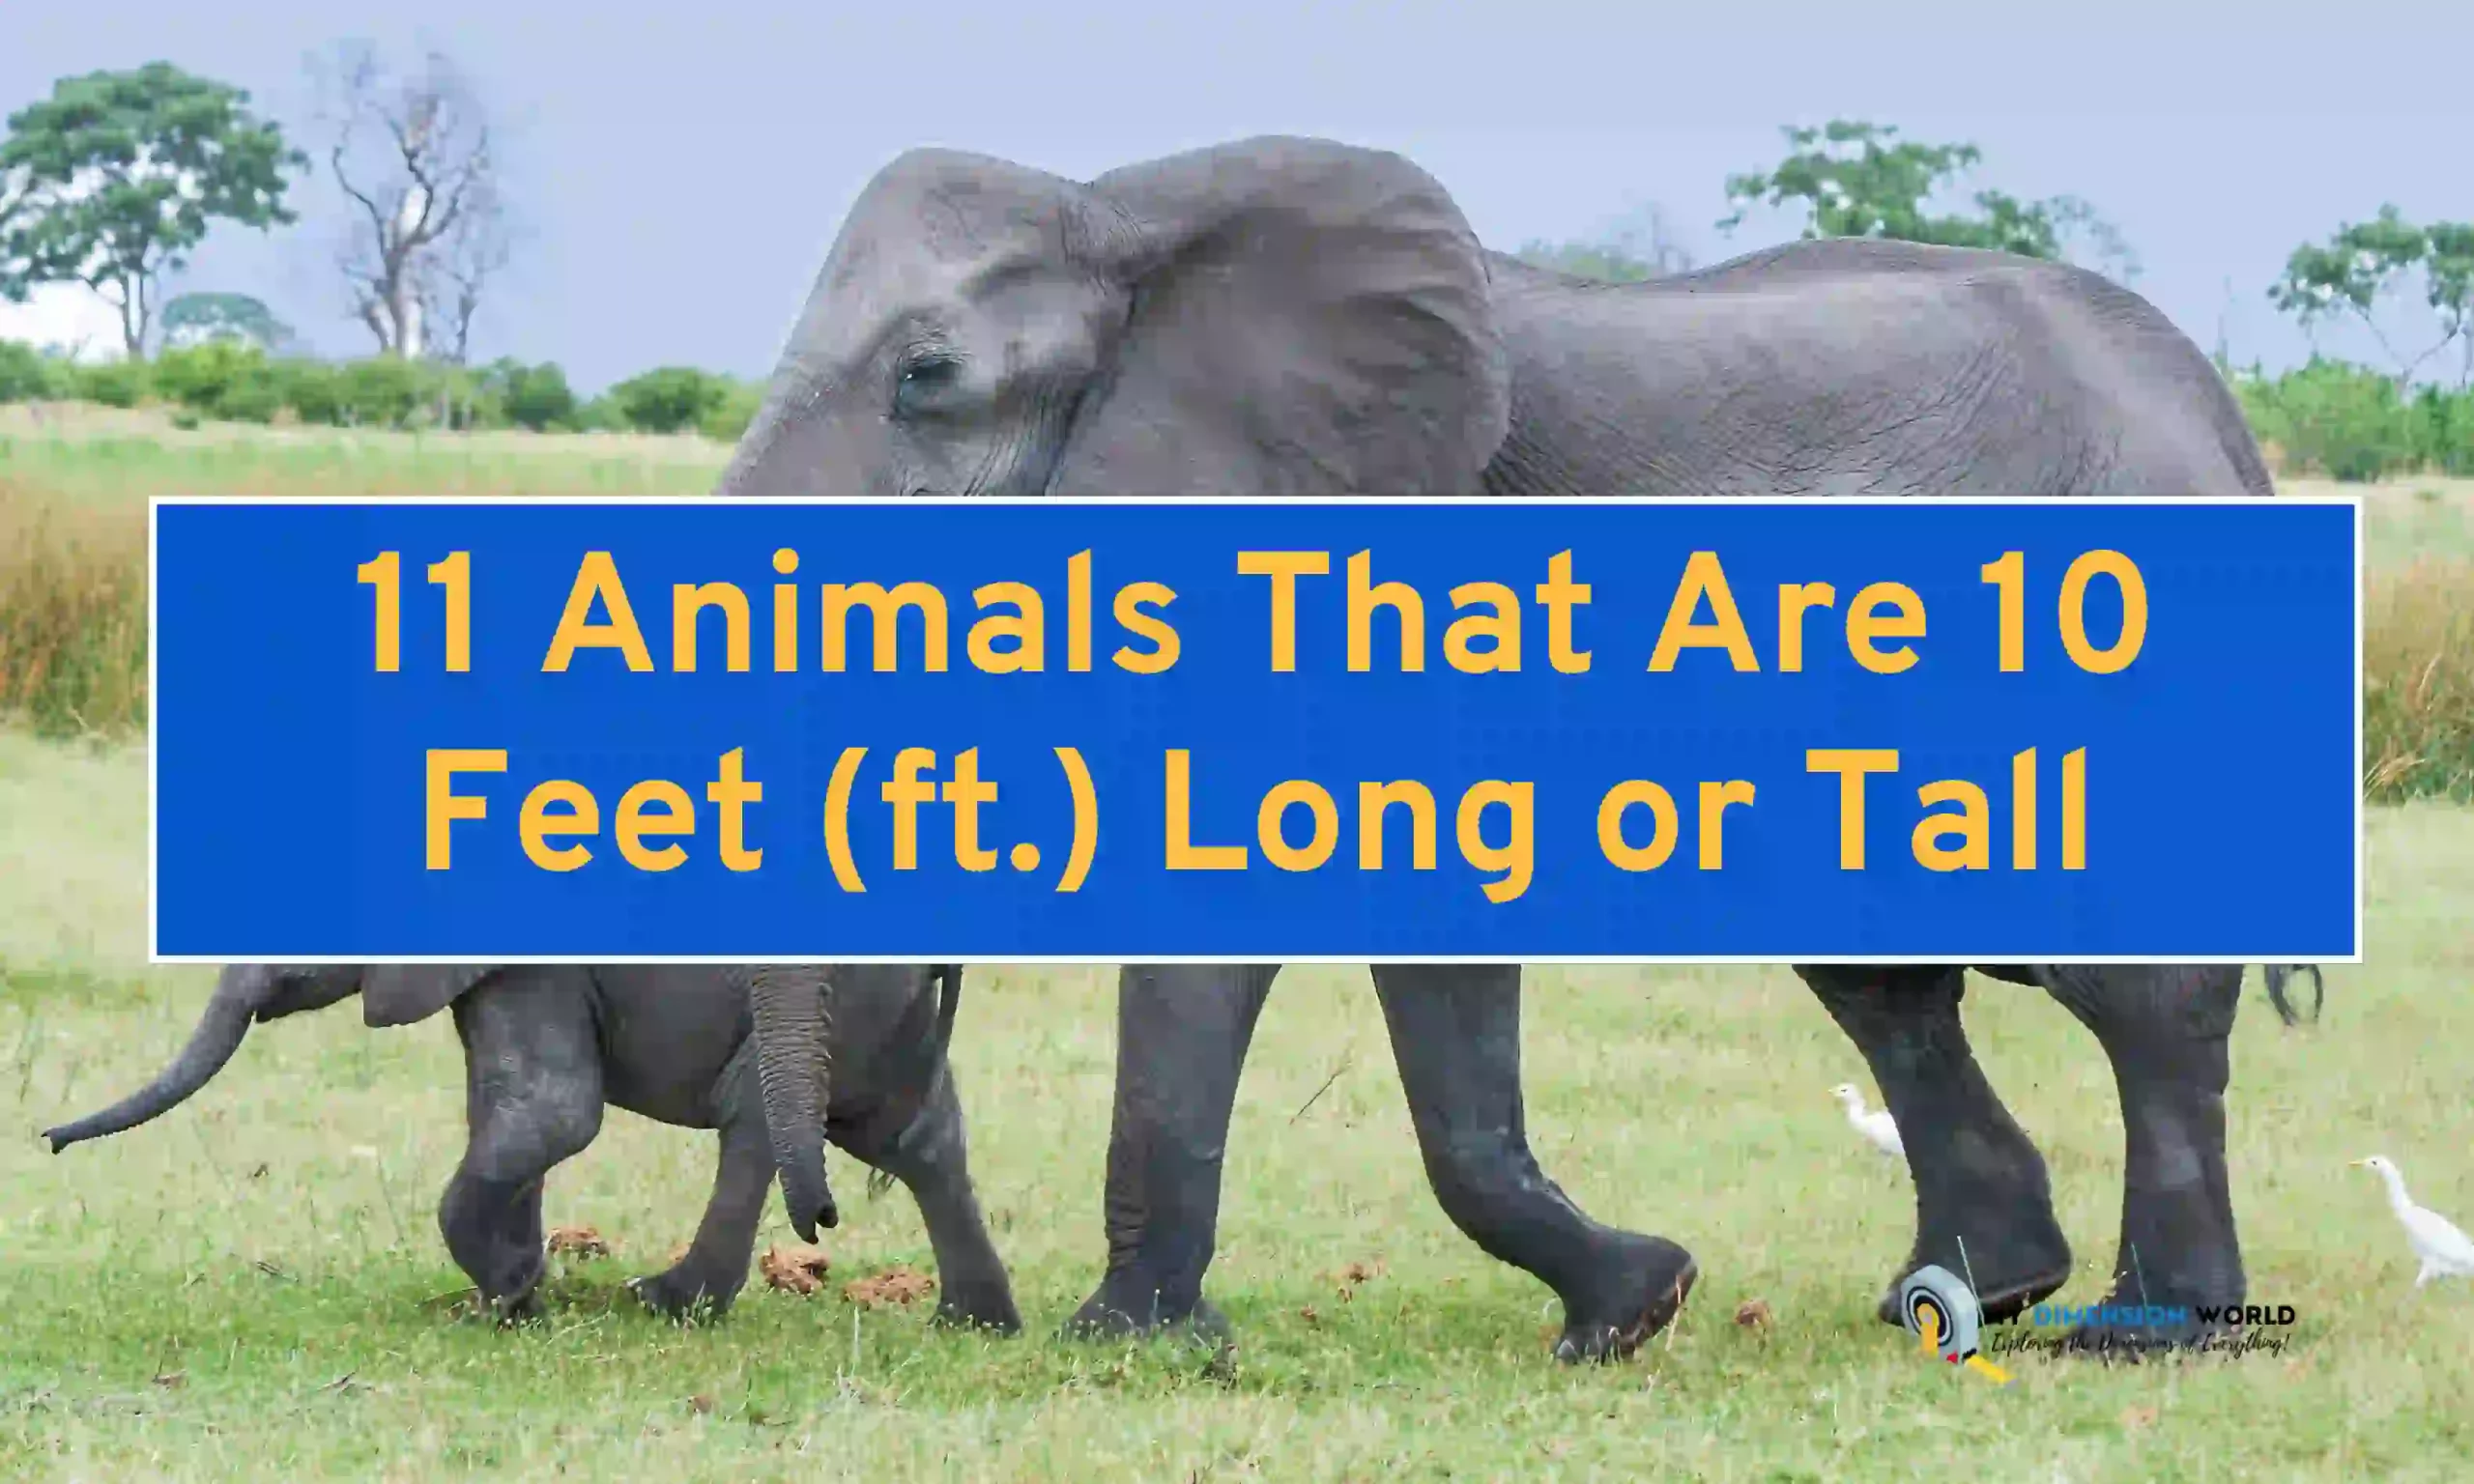 11 Animals That Are 10 Feet (ft.) Long or Tall